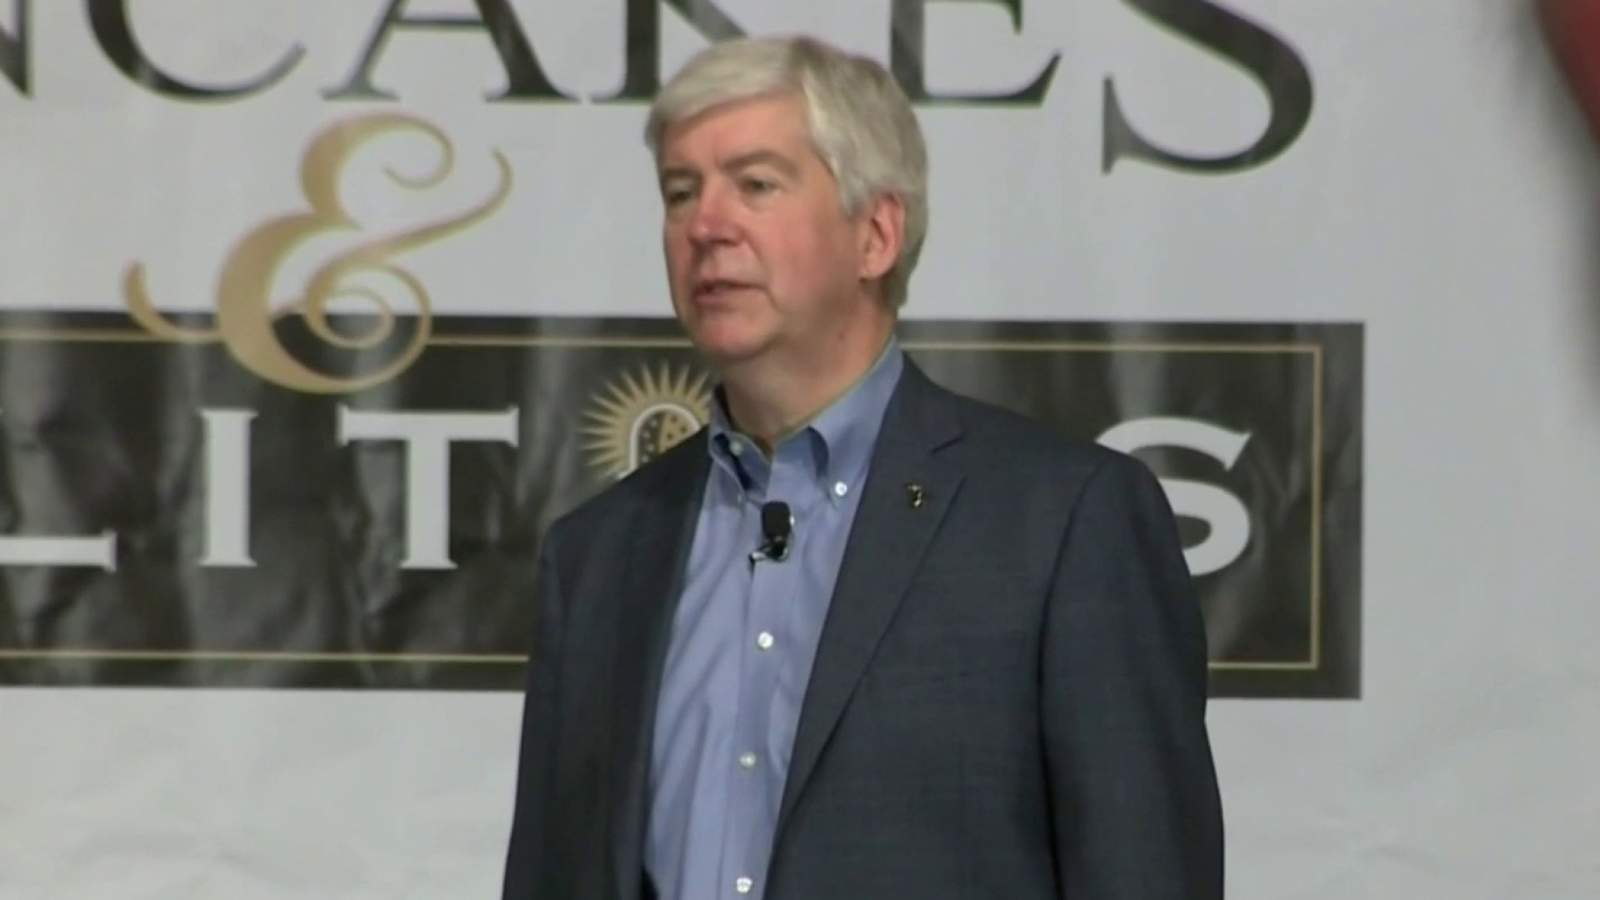 Former Michigan Gov. Snyder’s attorneys say charges were filed in wrong county